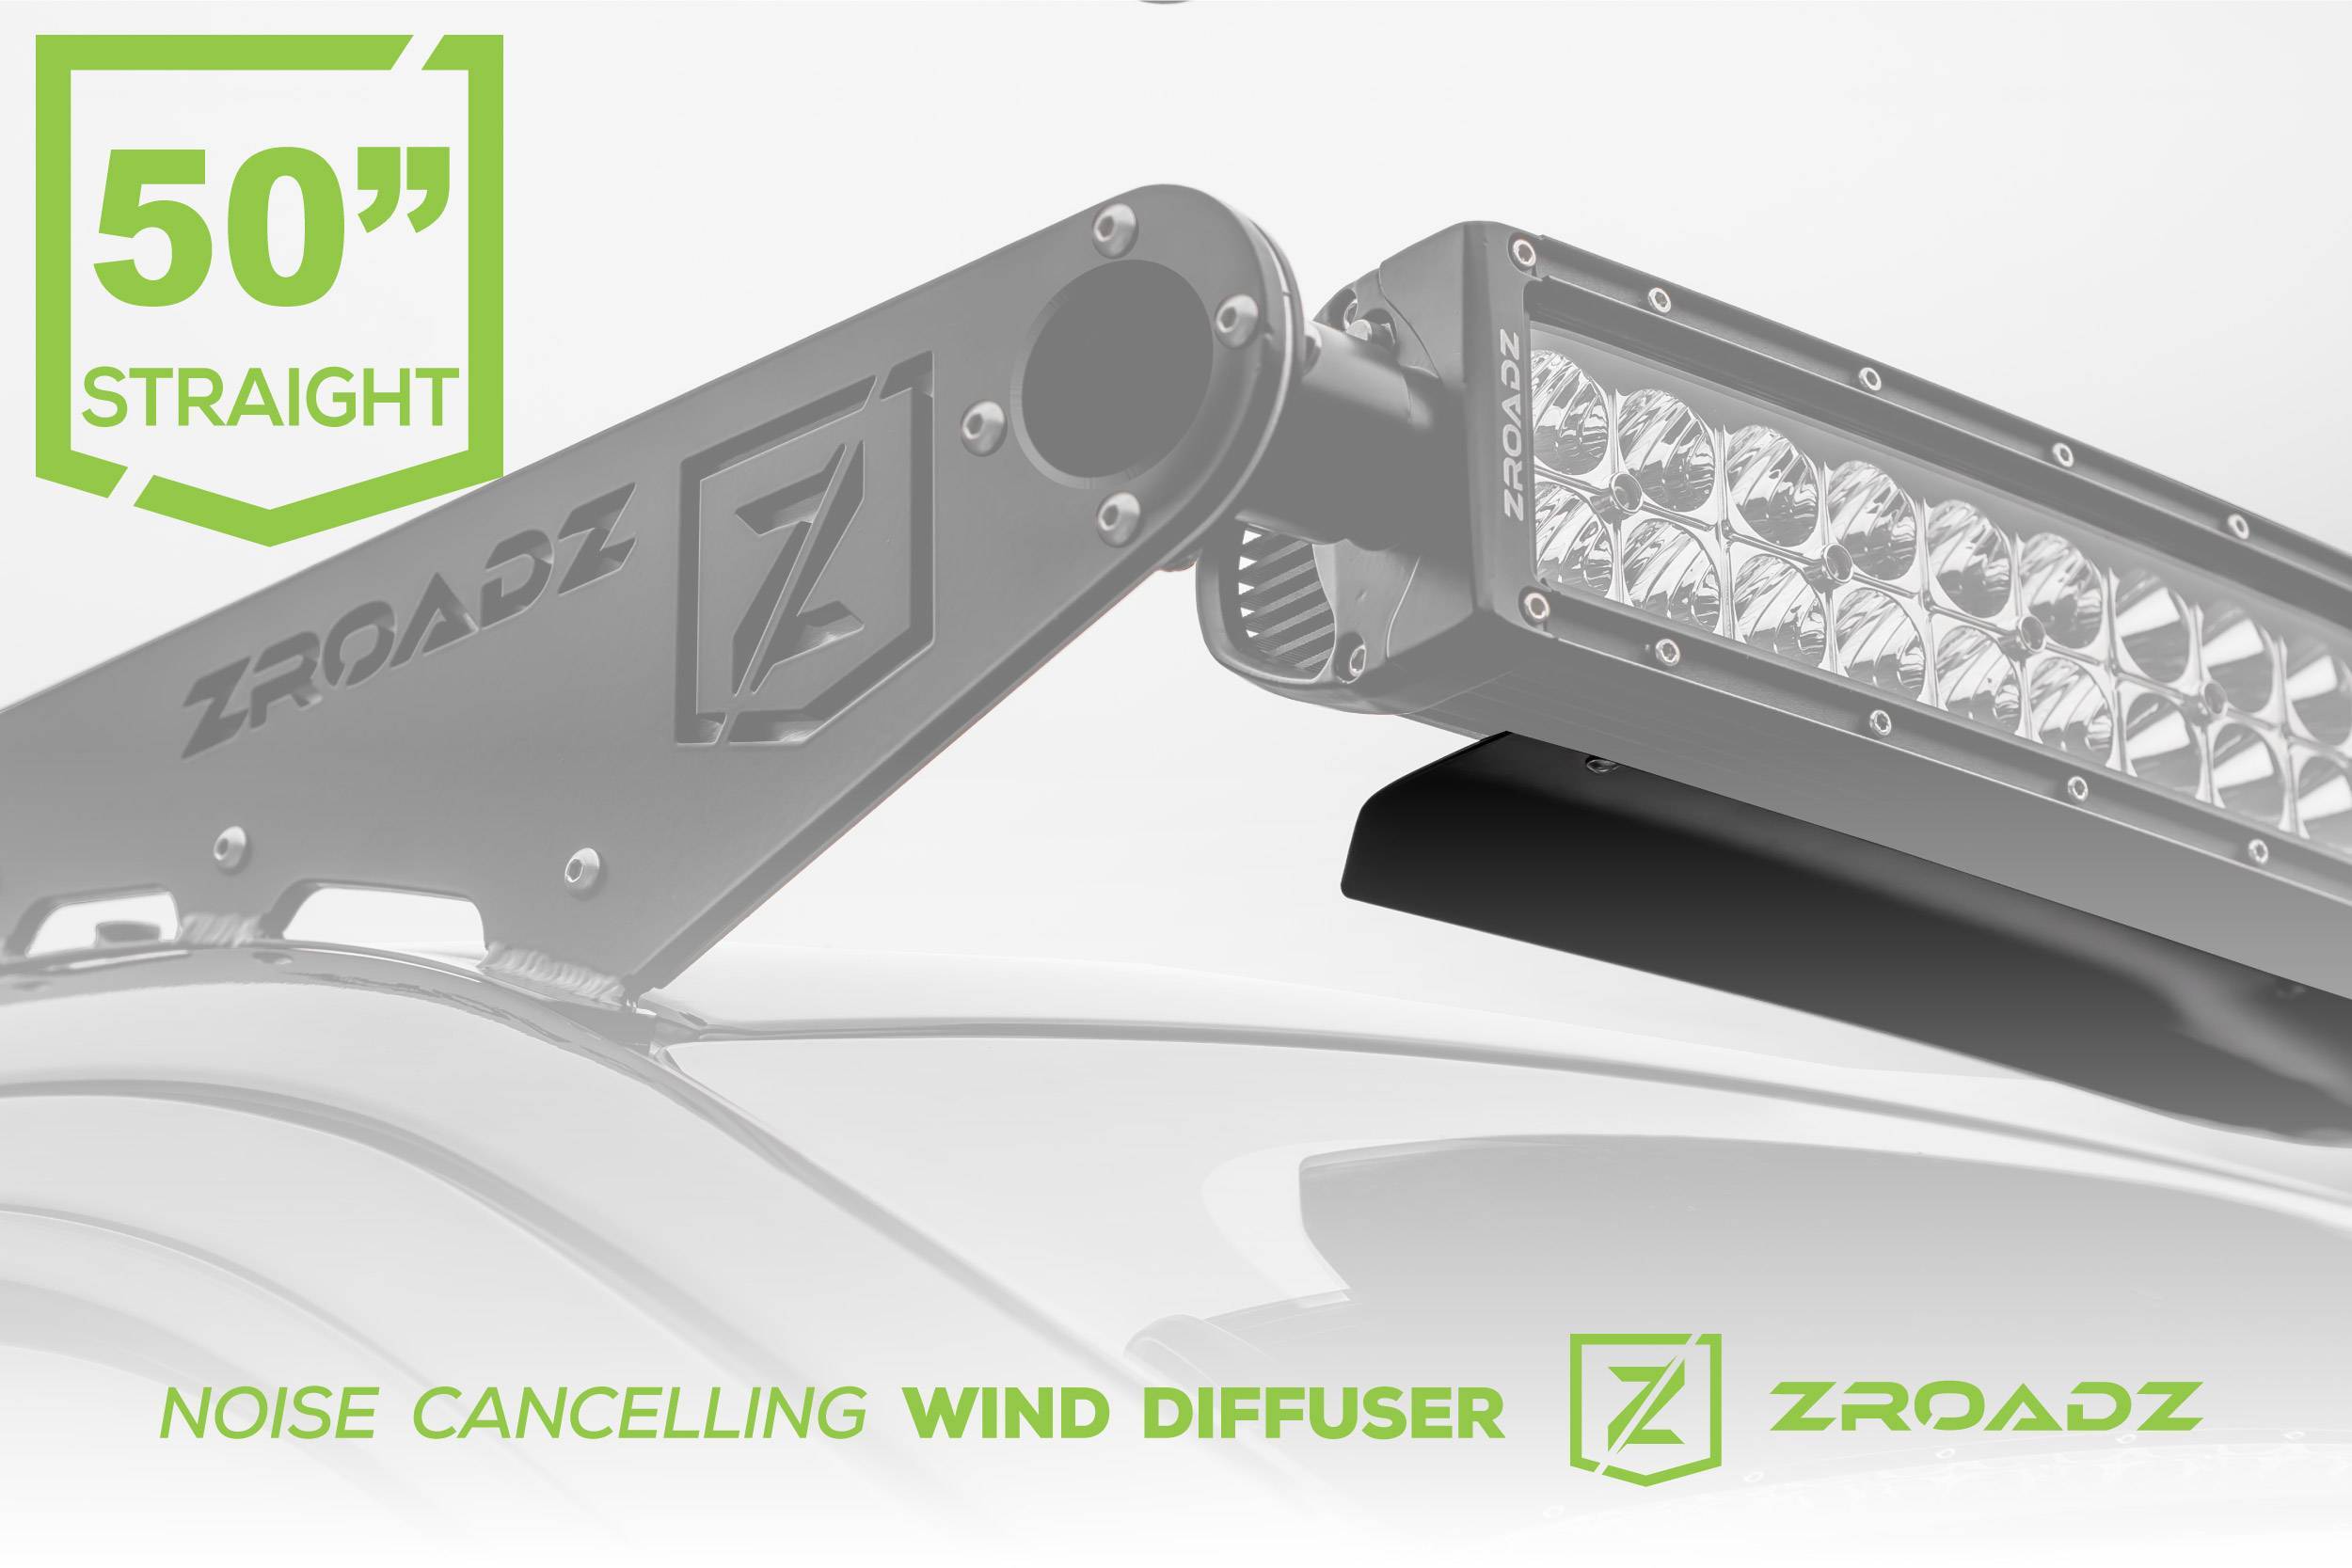 ZROADZ OFF ROAD PRODUCTS - Noise Cancelling Wind Diffuser for (1) 50 Inch Straight LED Light Bar - Part # Z330050S